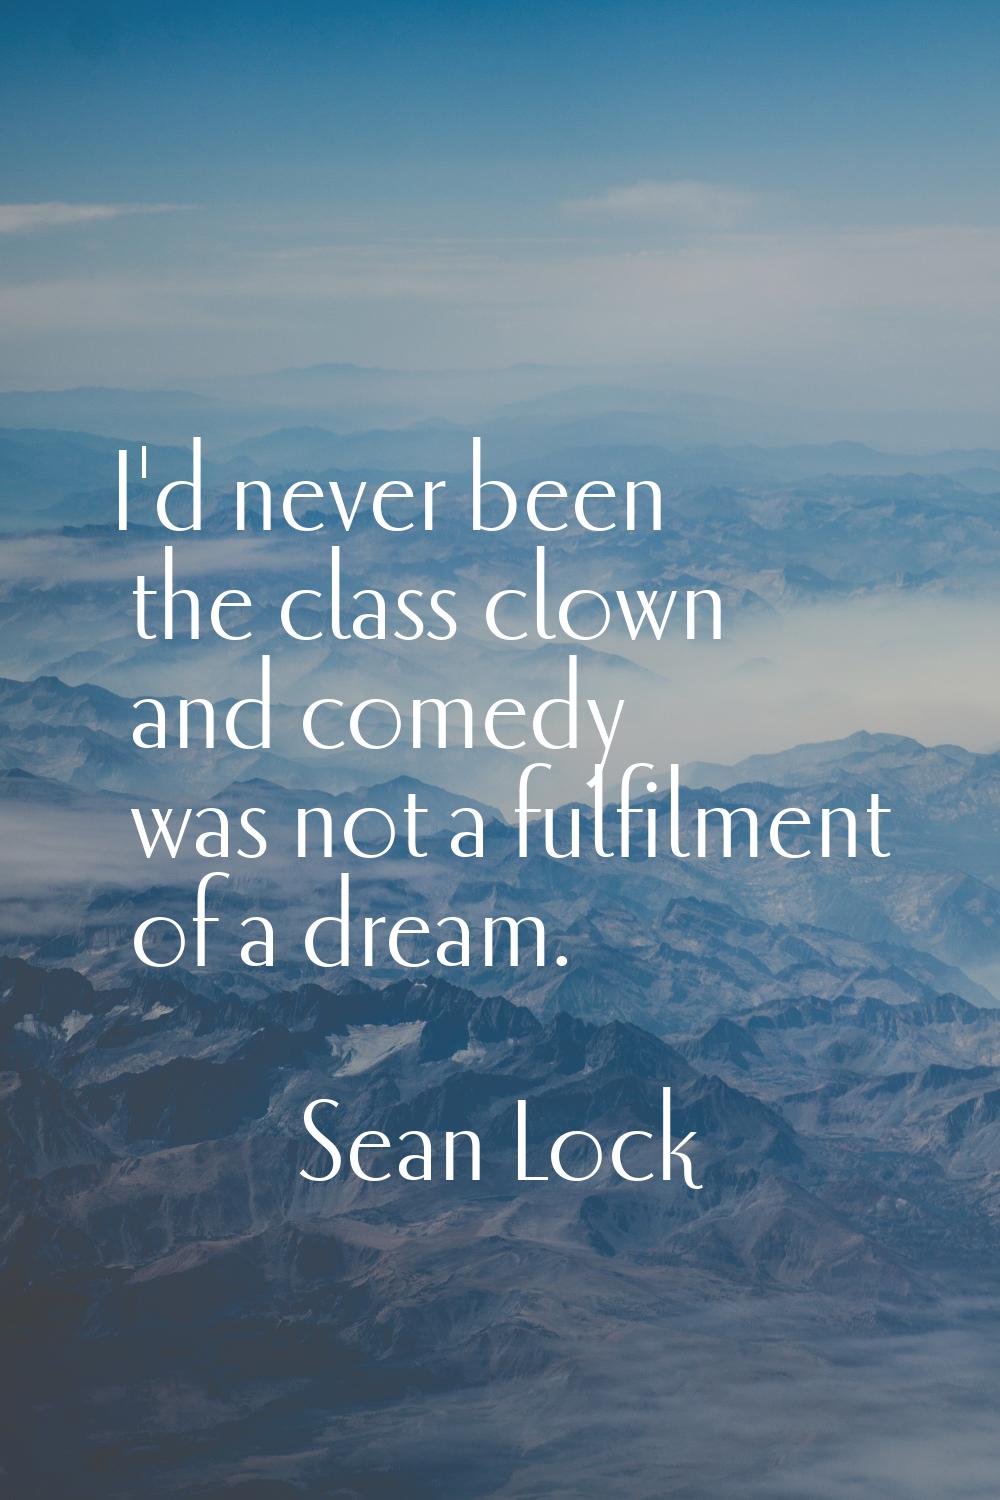 I'd never been the class clown and comedy was not a fulfilment of a dream.